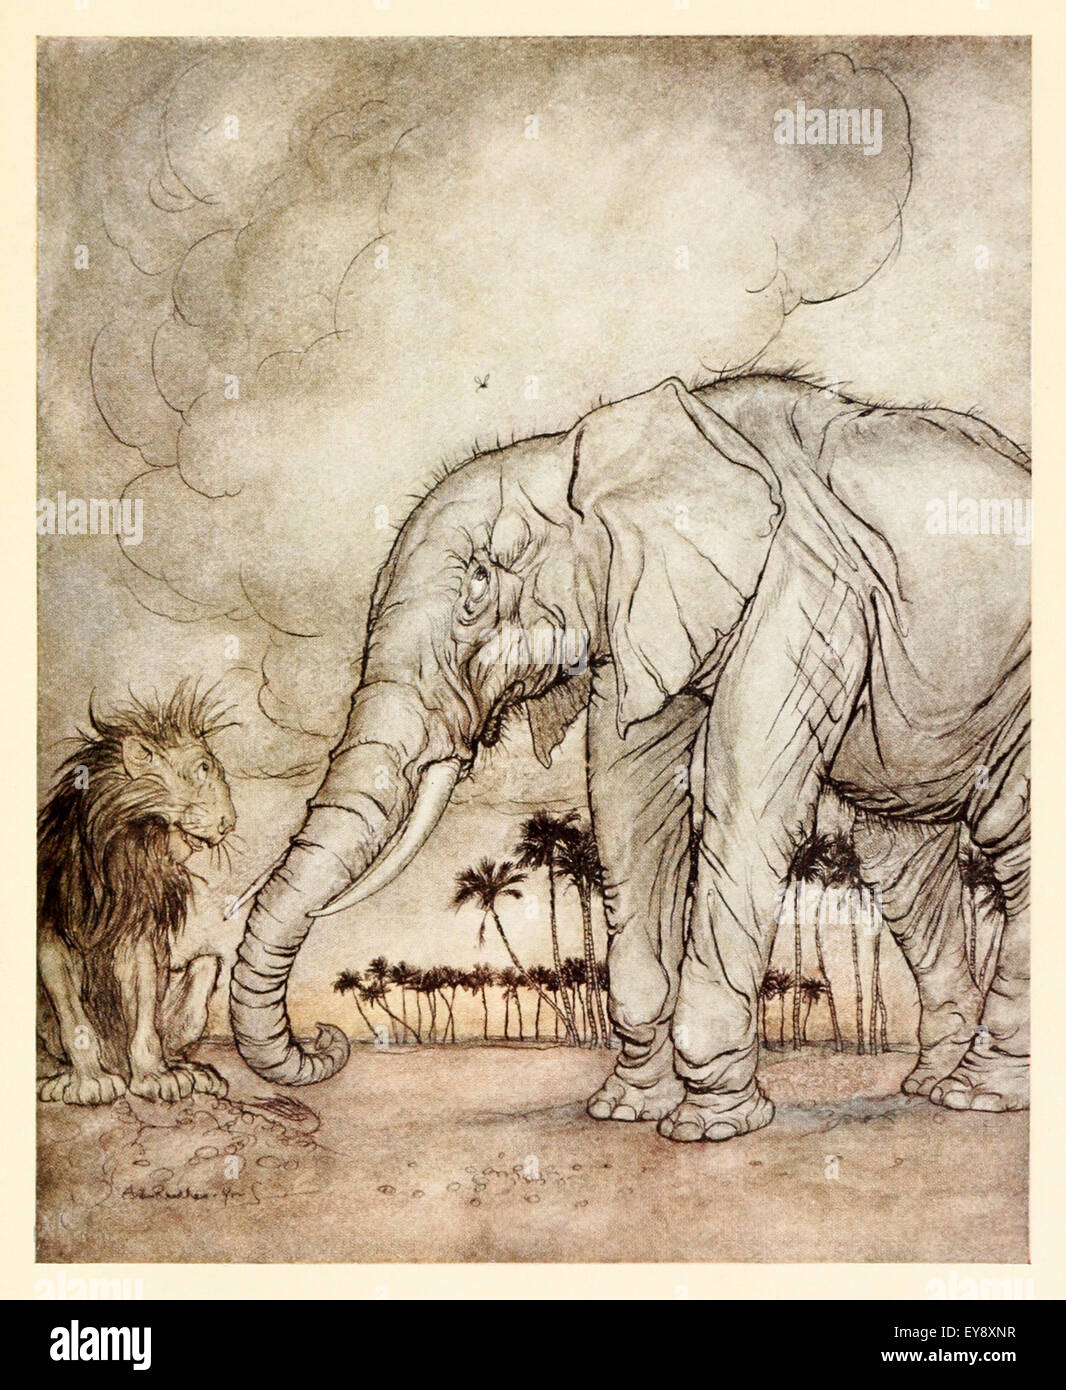 'The Lion, Jupiter and the Lion' fable by Aesop (circa 600BC). A Lion bemoaned his state to Jupiter who refused to help. The Lion then saw an Elephant who was bothered by a Gnat. The Lion thought better of his state. Moral: There is always someone else worse off than you. Illustration by Arthur Rackham (1867-1939). See description for more information. Stock Photo